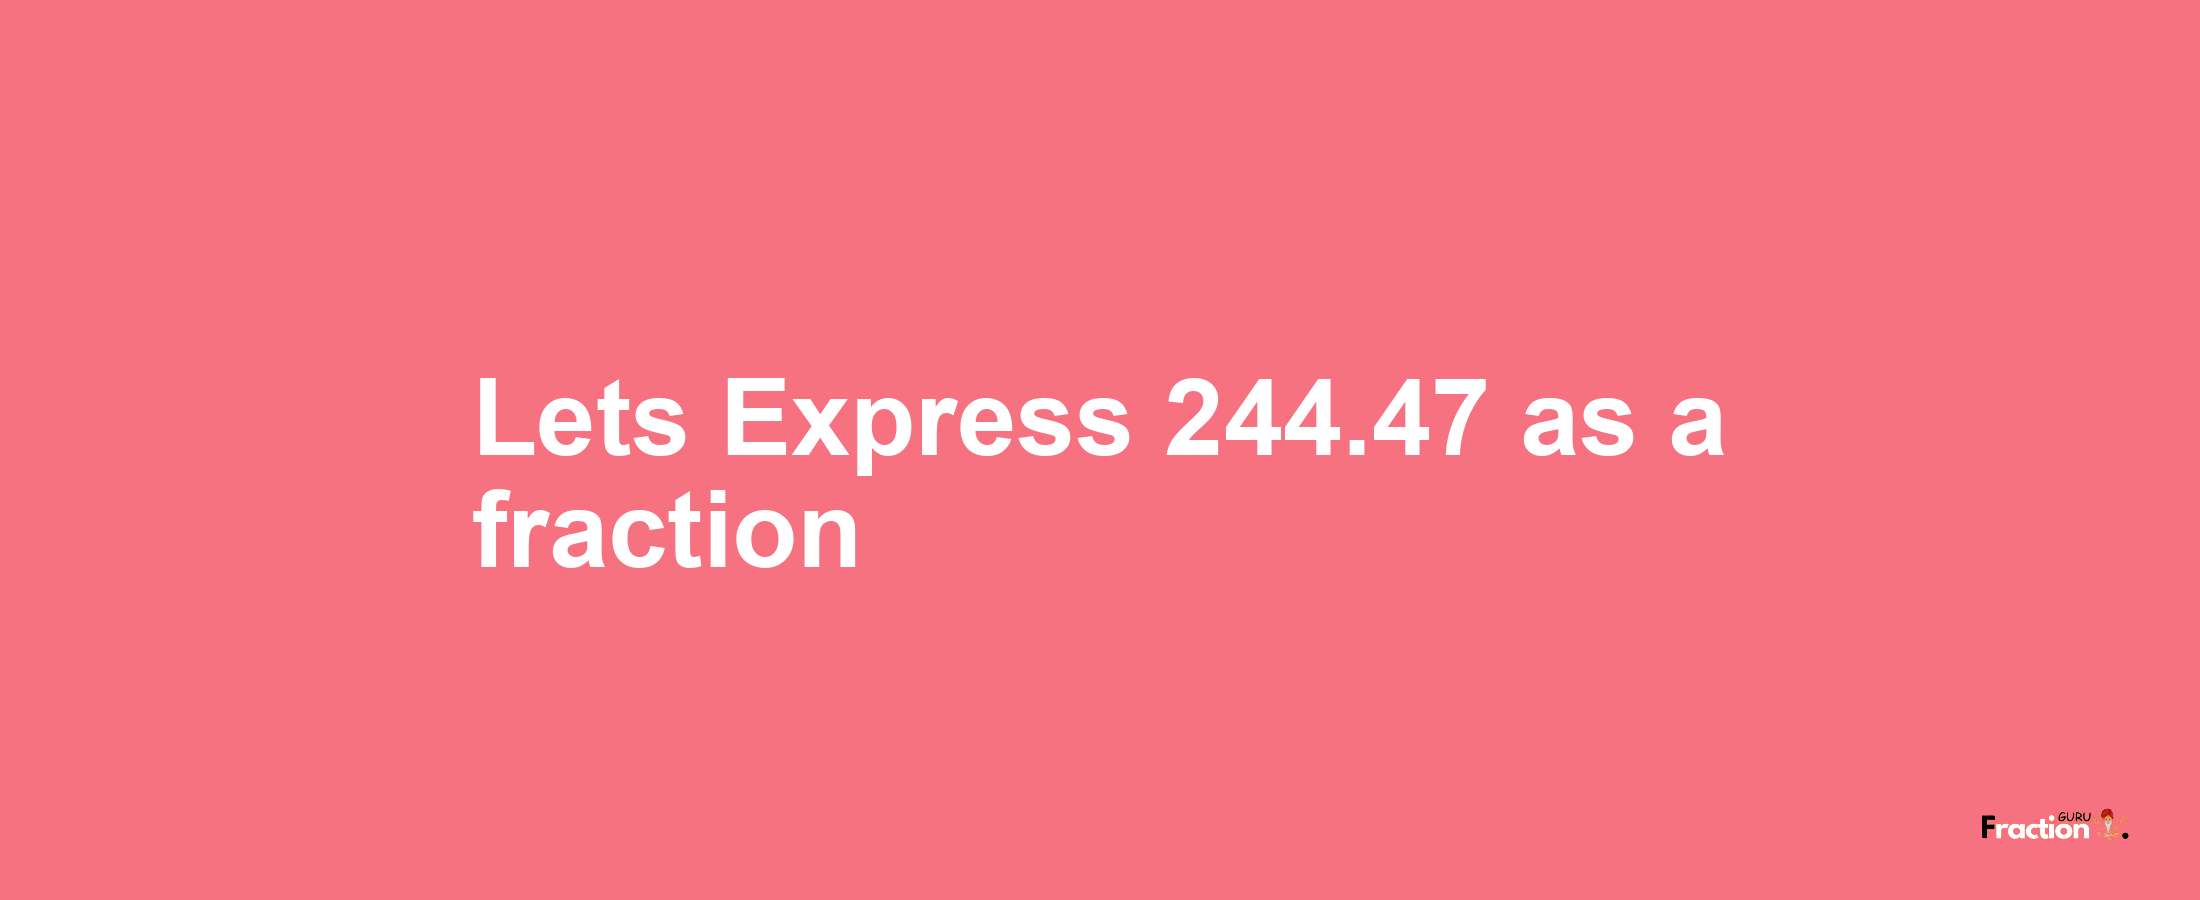 Lets Express 244.47 as afraction